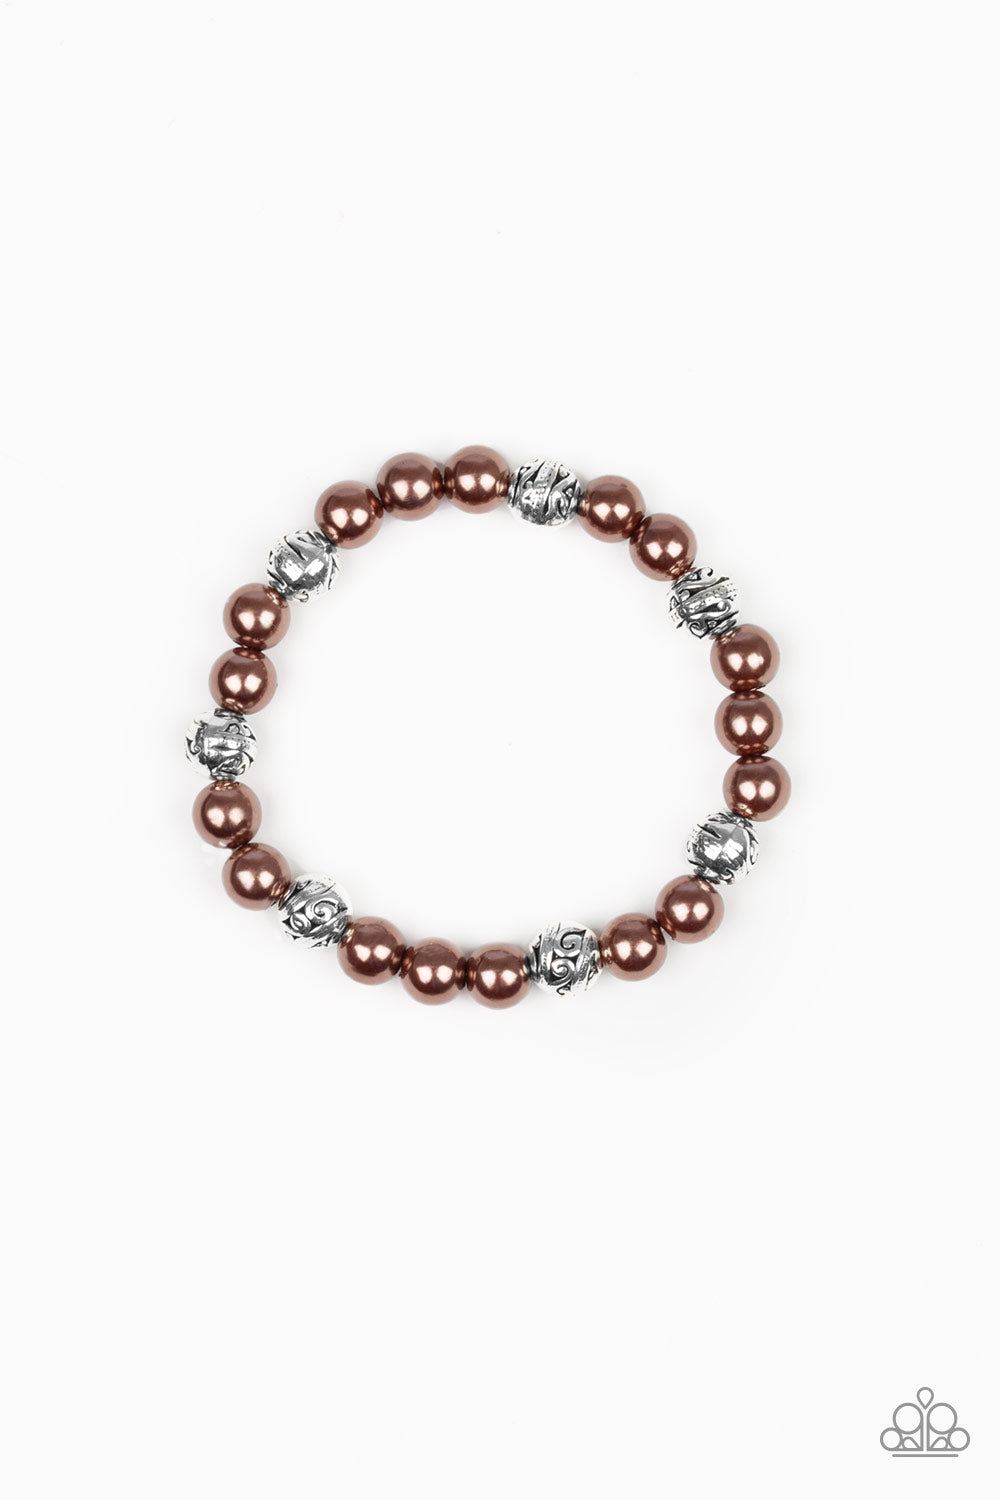 Paparazzi Bracelets - Poised For Perfection - Brown